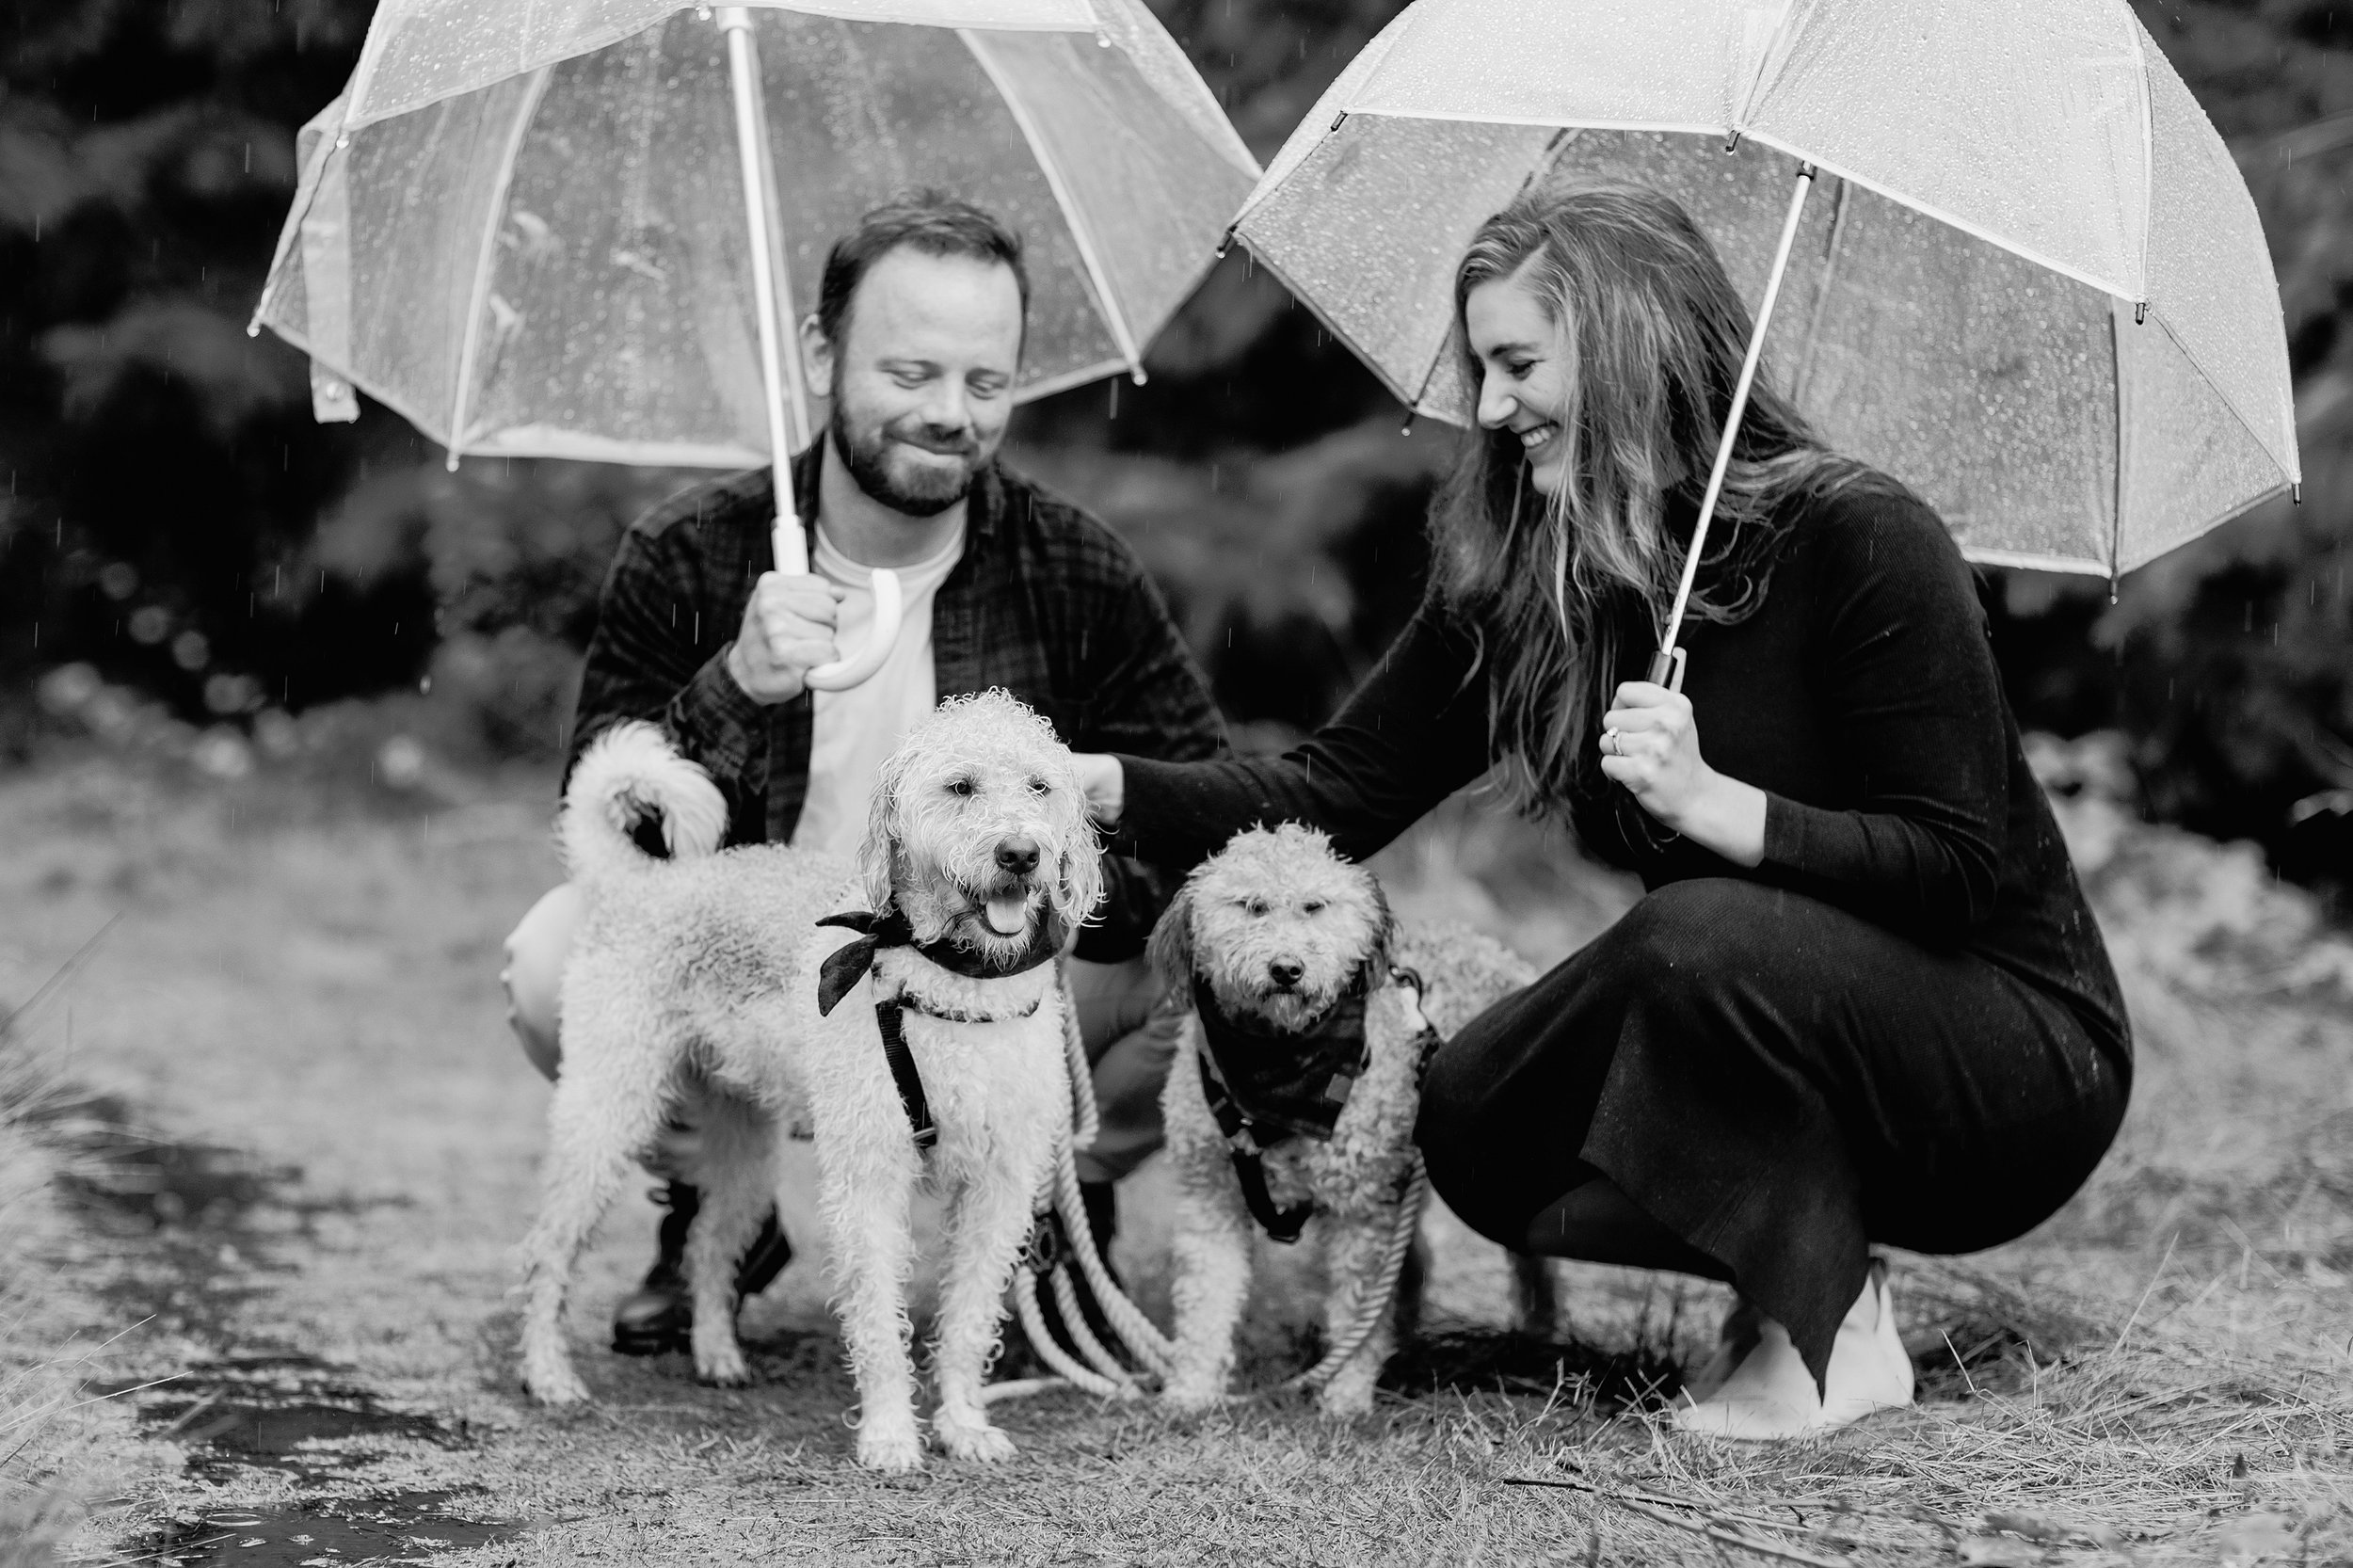 seattle_dog_puppy_maternity_session_newborn_photography_baby_home_lifestyle_fresh_48_session_pnw_0103.jpg